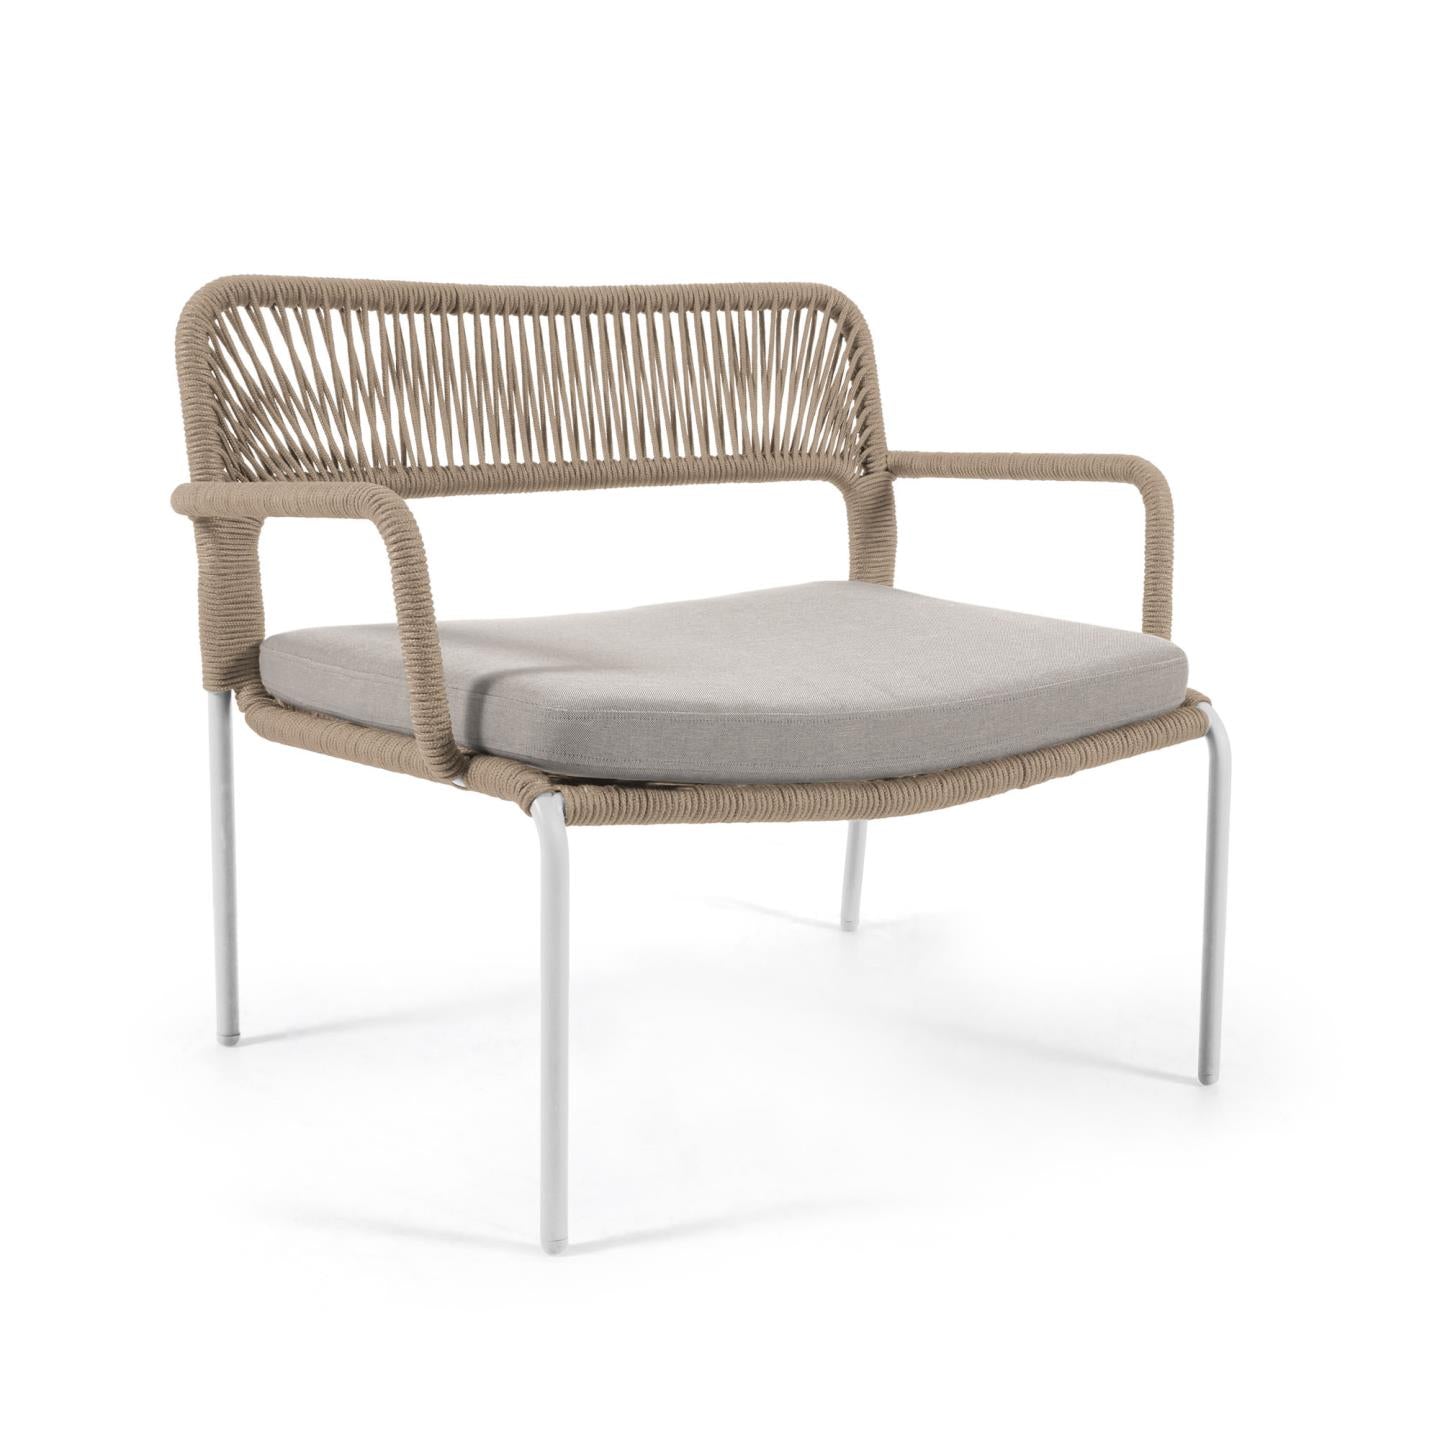 Cailin armchair in beige cord with galvanised steel legs painted white